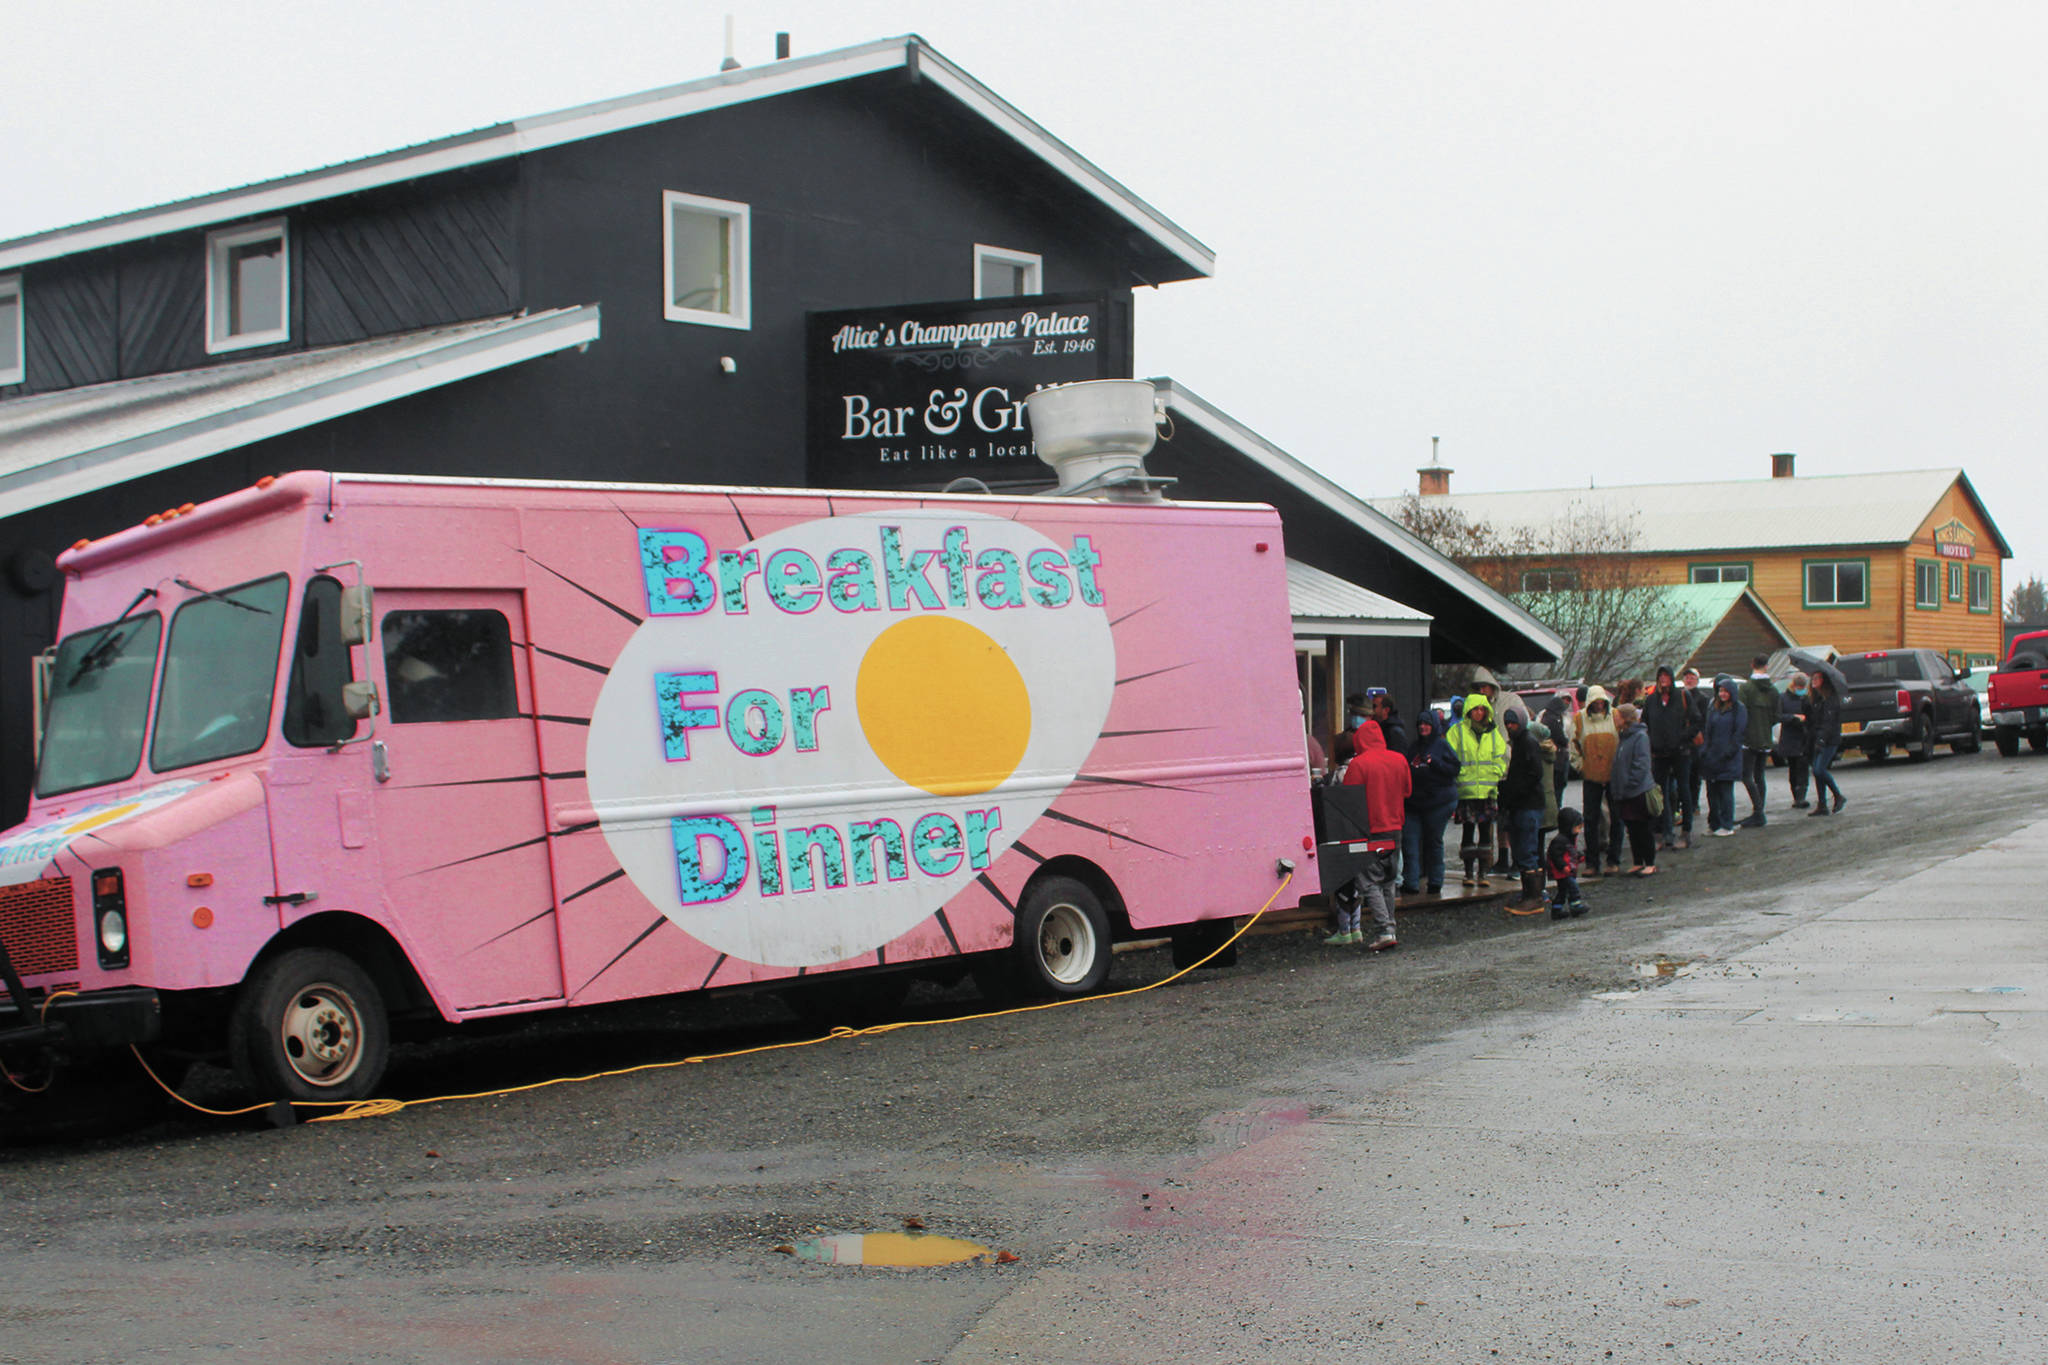 Locals wait in line to eat from the BFDfoodtruck (breakfast for dinner) on Sunday, Nov. 8, 2020 at Alice's Champagne Palace in Homer, Alaska. The food truck was in town along with four others as part of the Food Network show "The Great Food Truck Race." (Photo by Megan Pacer/Homer News)